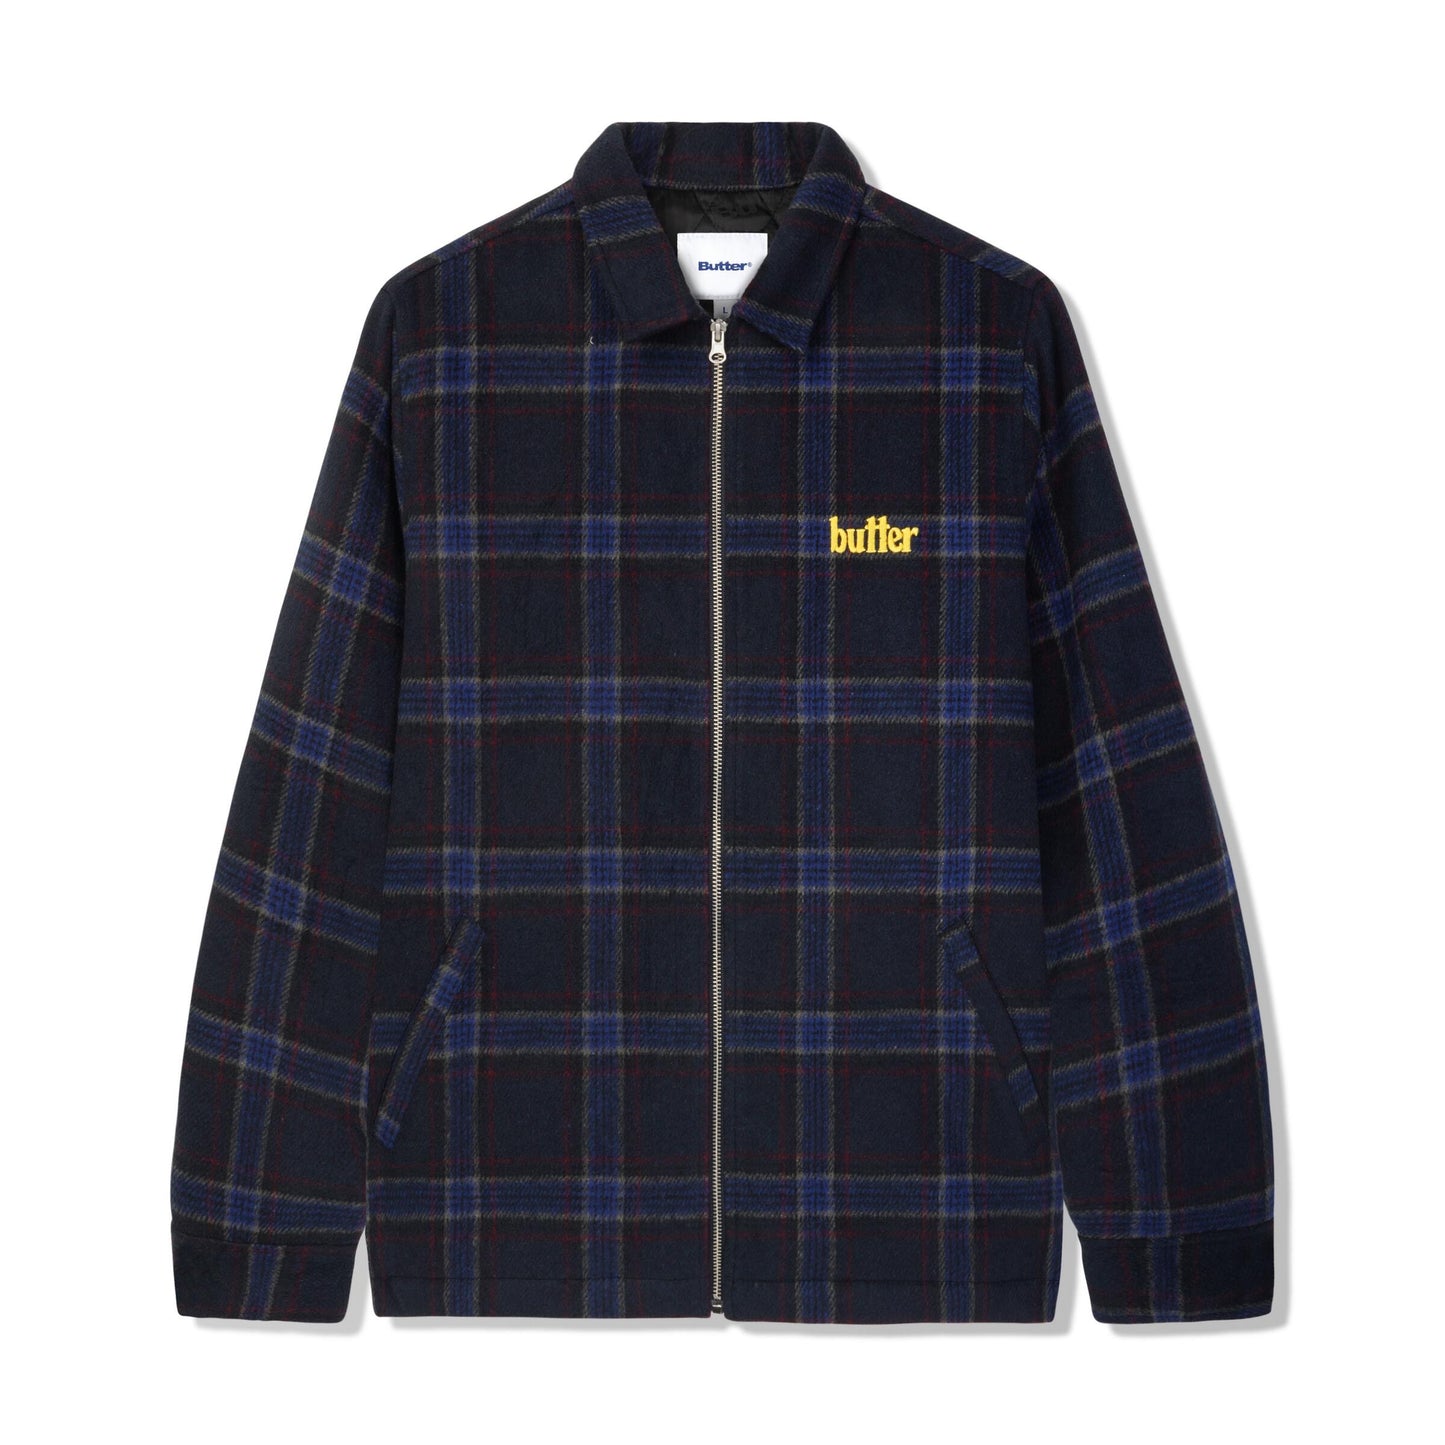 Butter Plaid Flannel Insulated Overshirt Navy